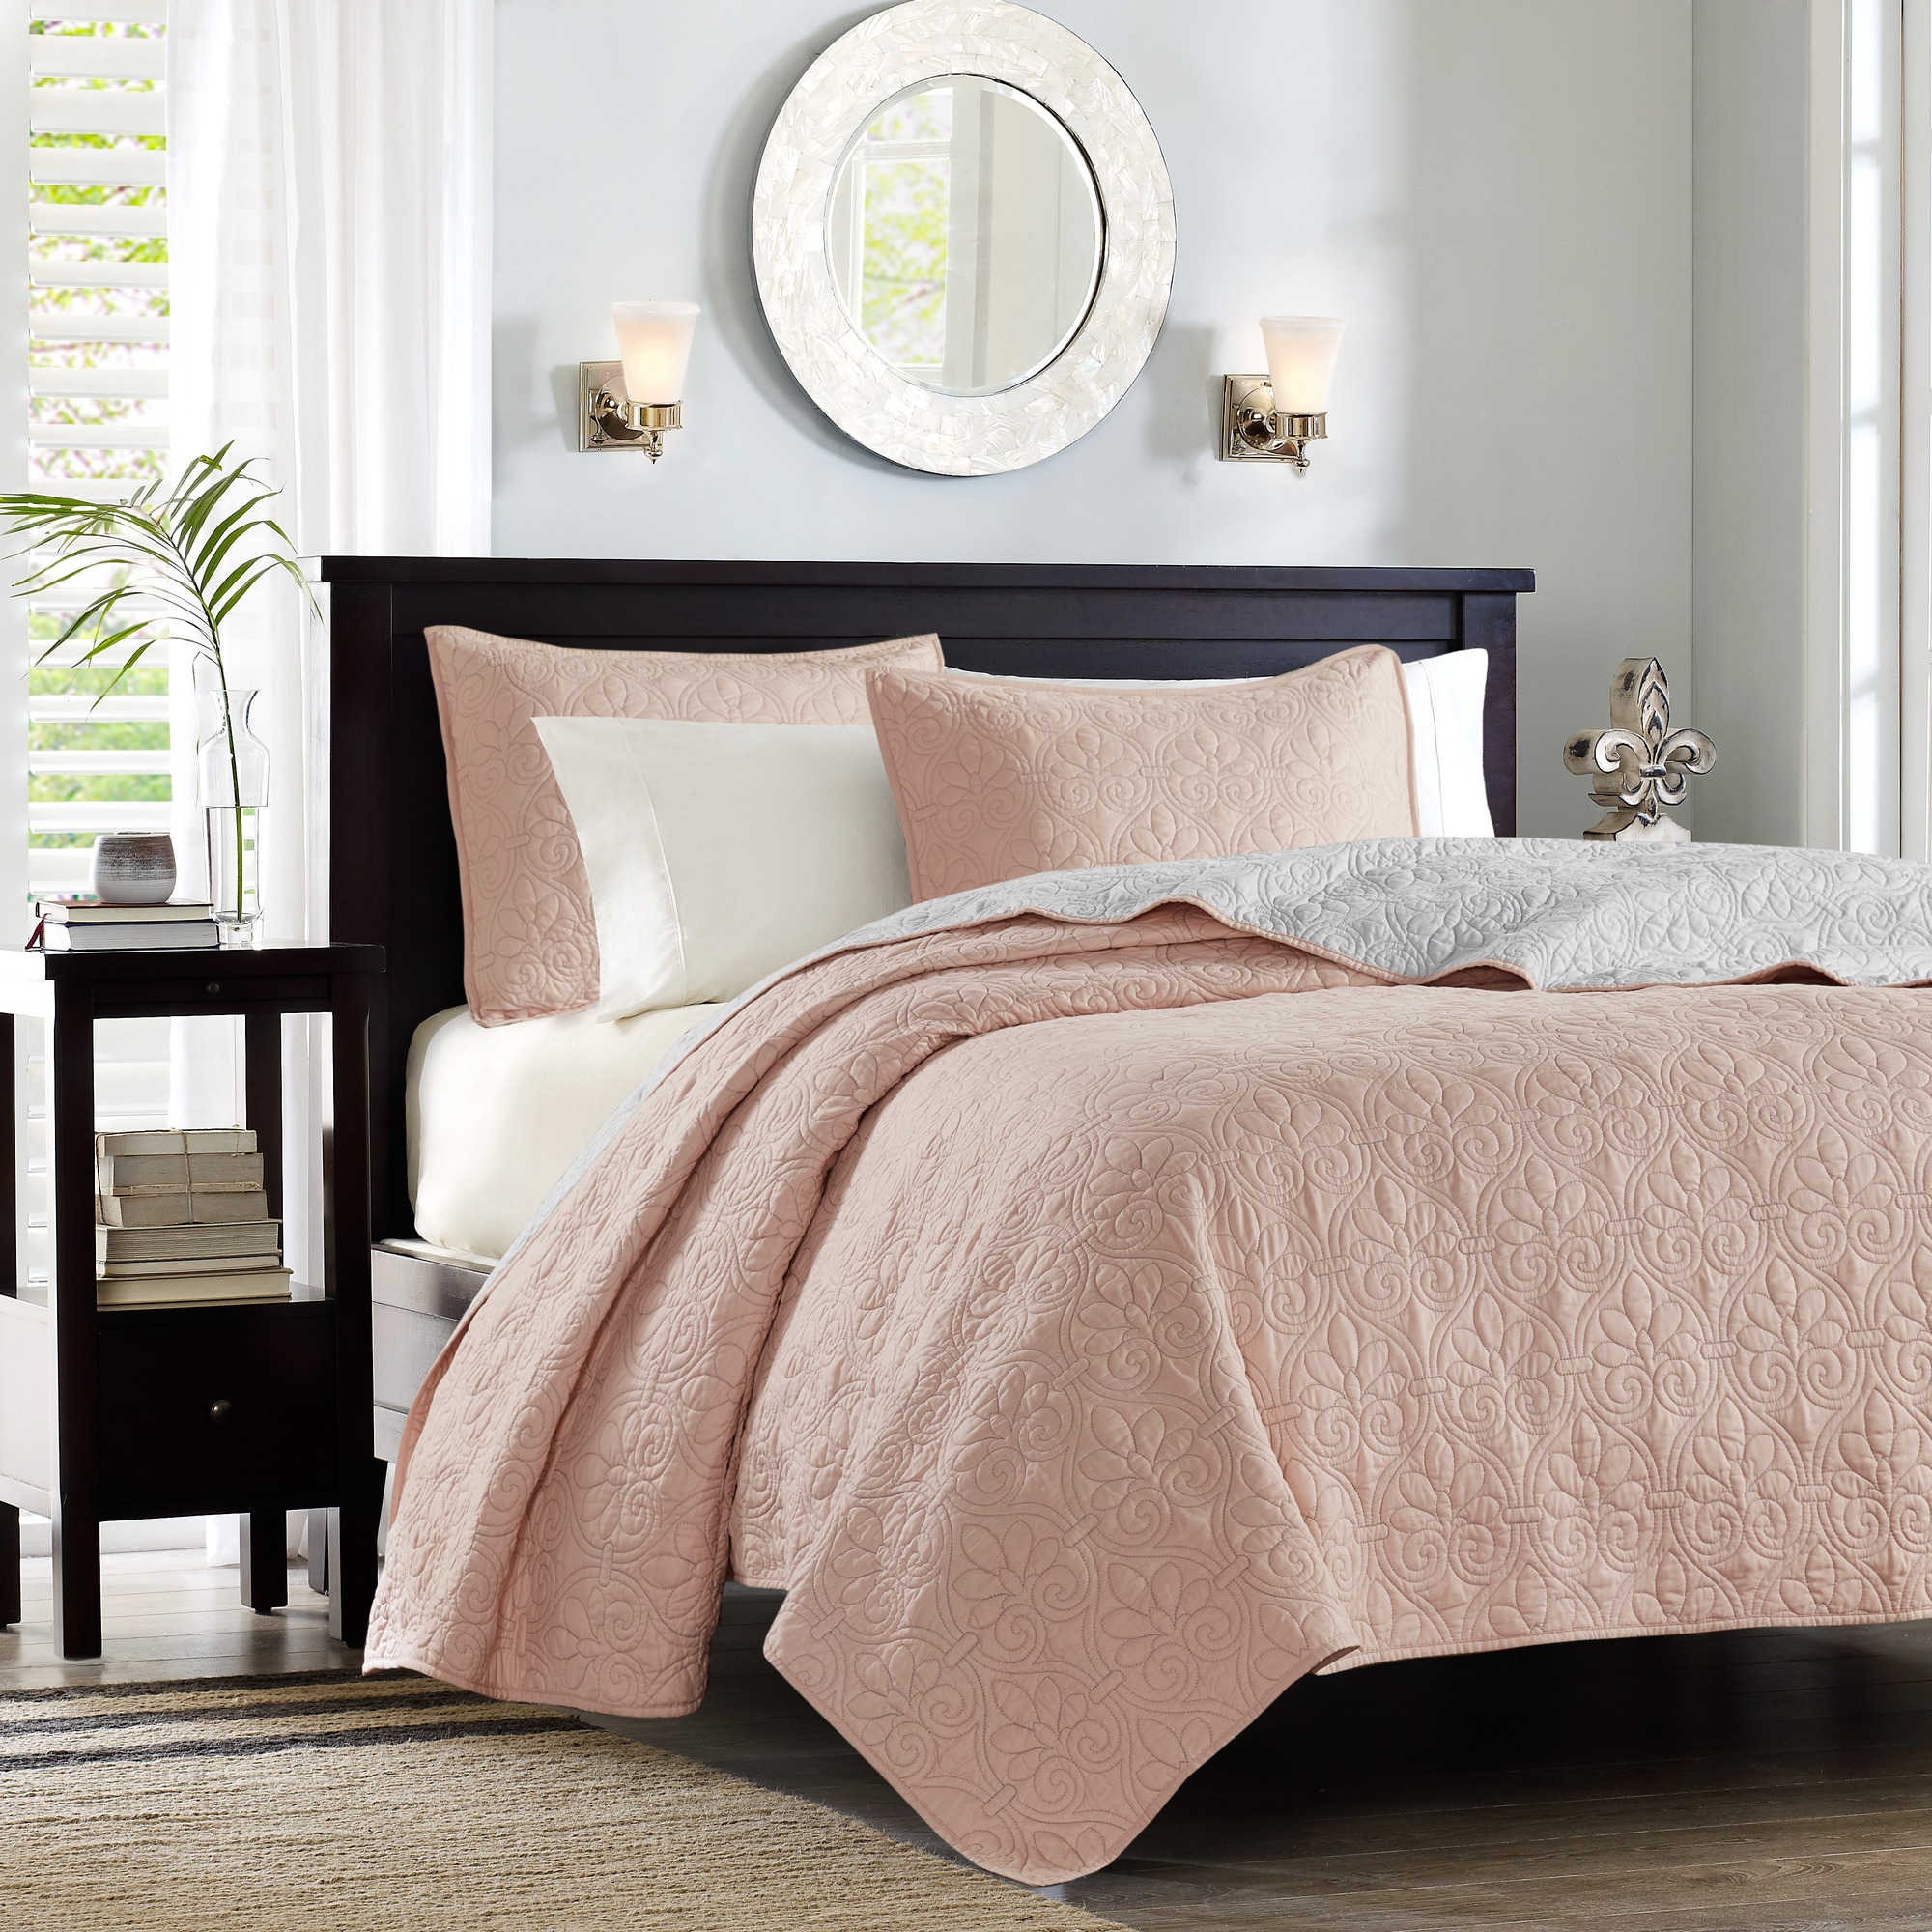 Home Essence Vancouver Super Soft Reversible Coverlet Set, Blush/Light Grey, Full/Queen - image 1 of 22